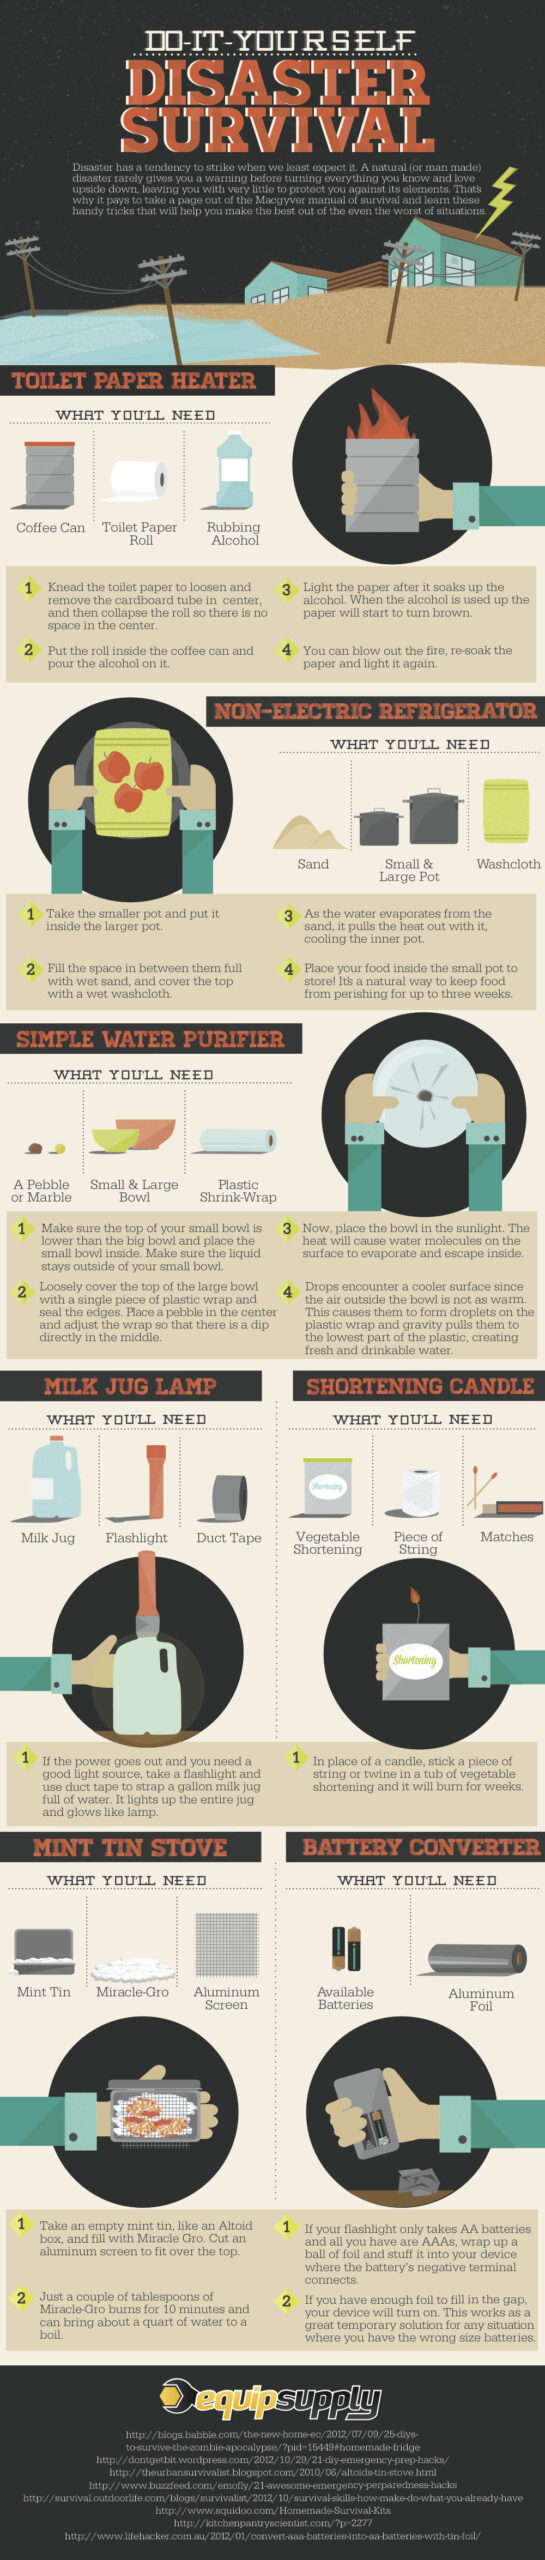 Pin by TheToyZone on Awesome Infographics / Infographic Board in 2020 | Survival life hacks ...